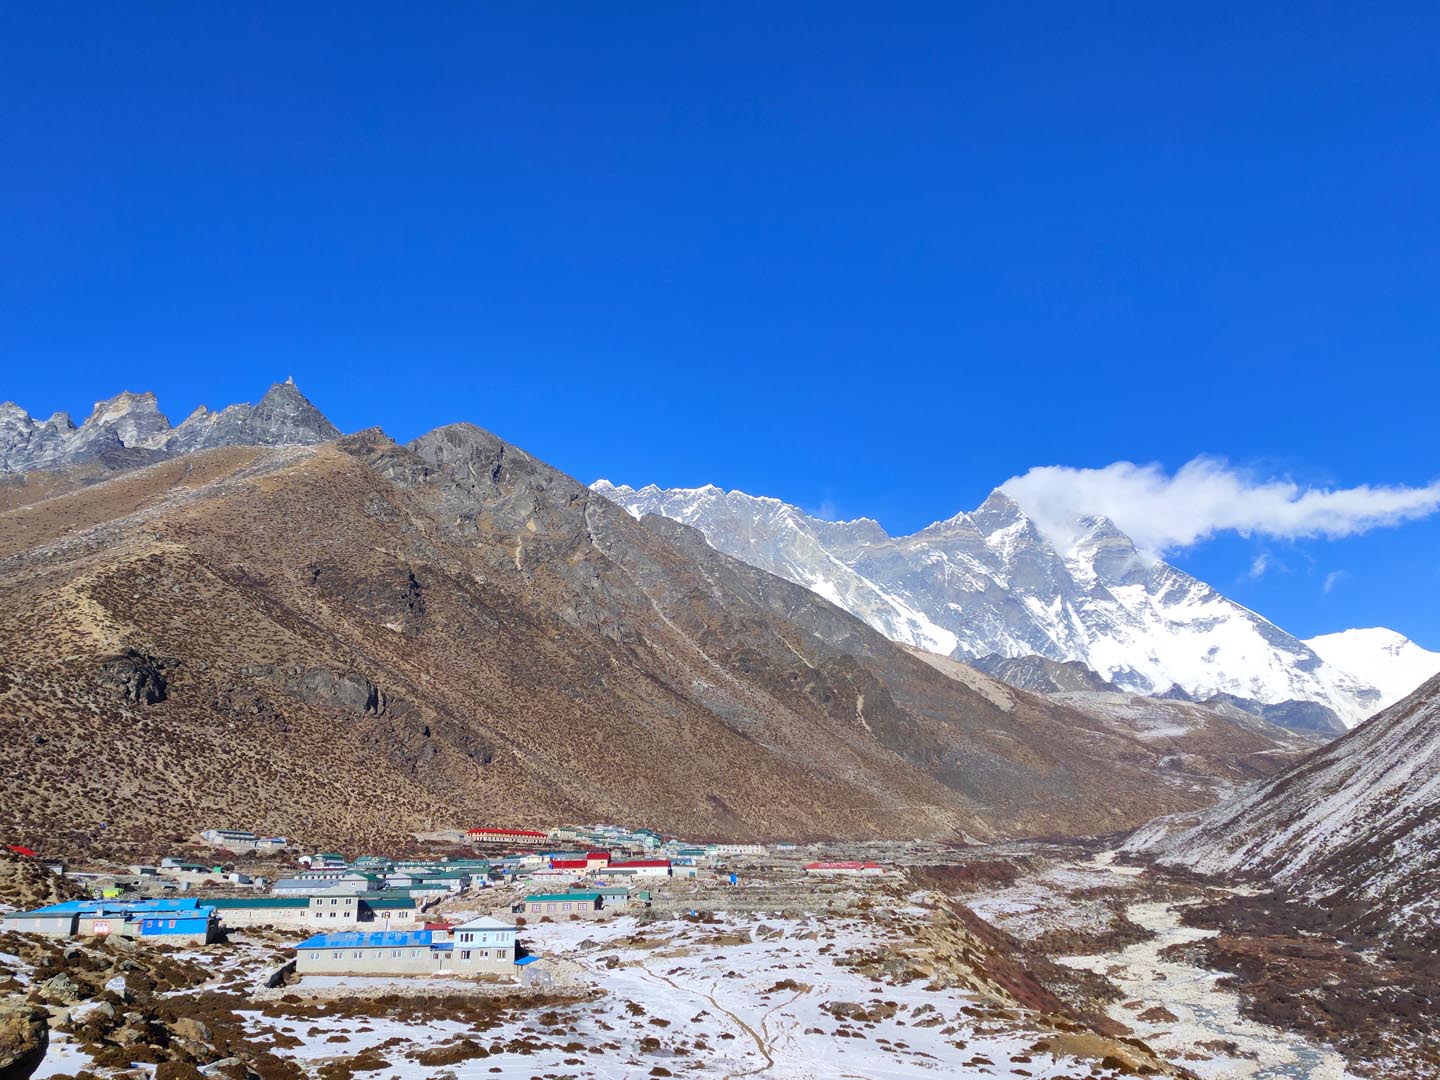 Dingboche village at an altitude of 4,350 m